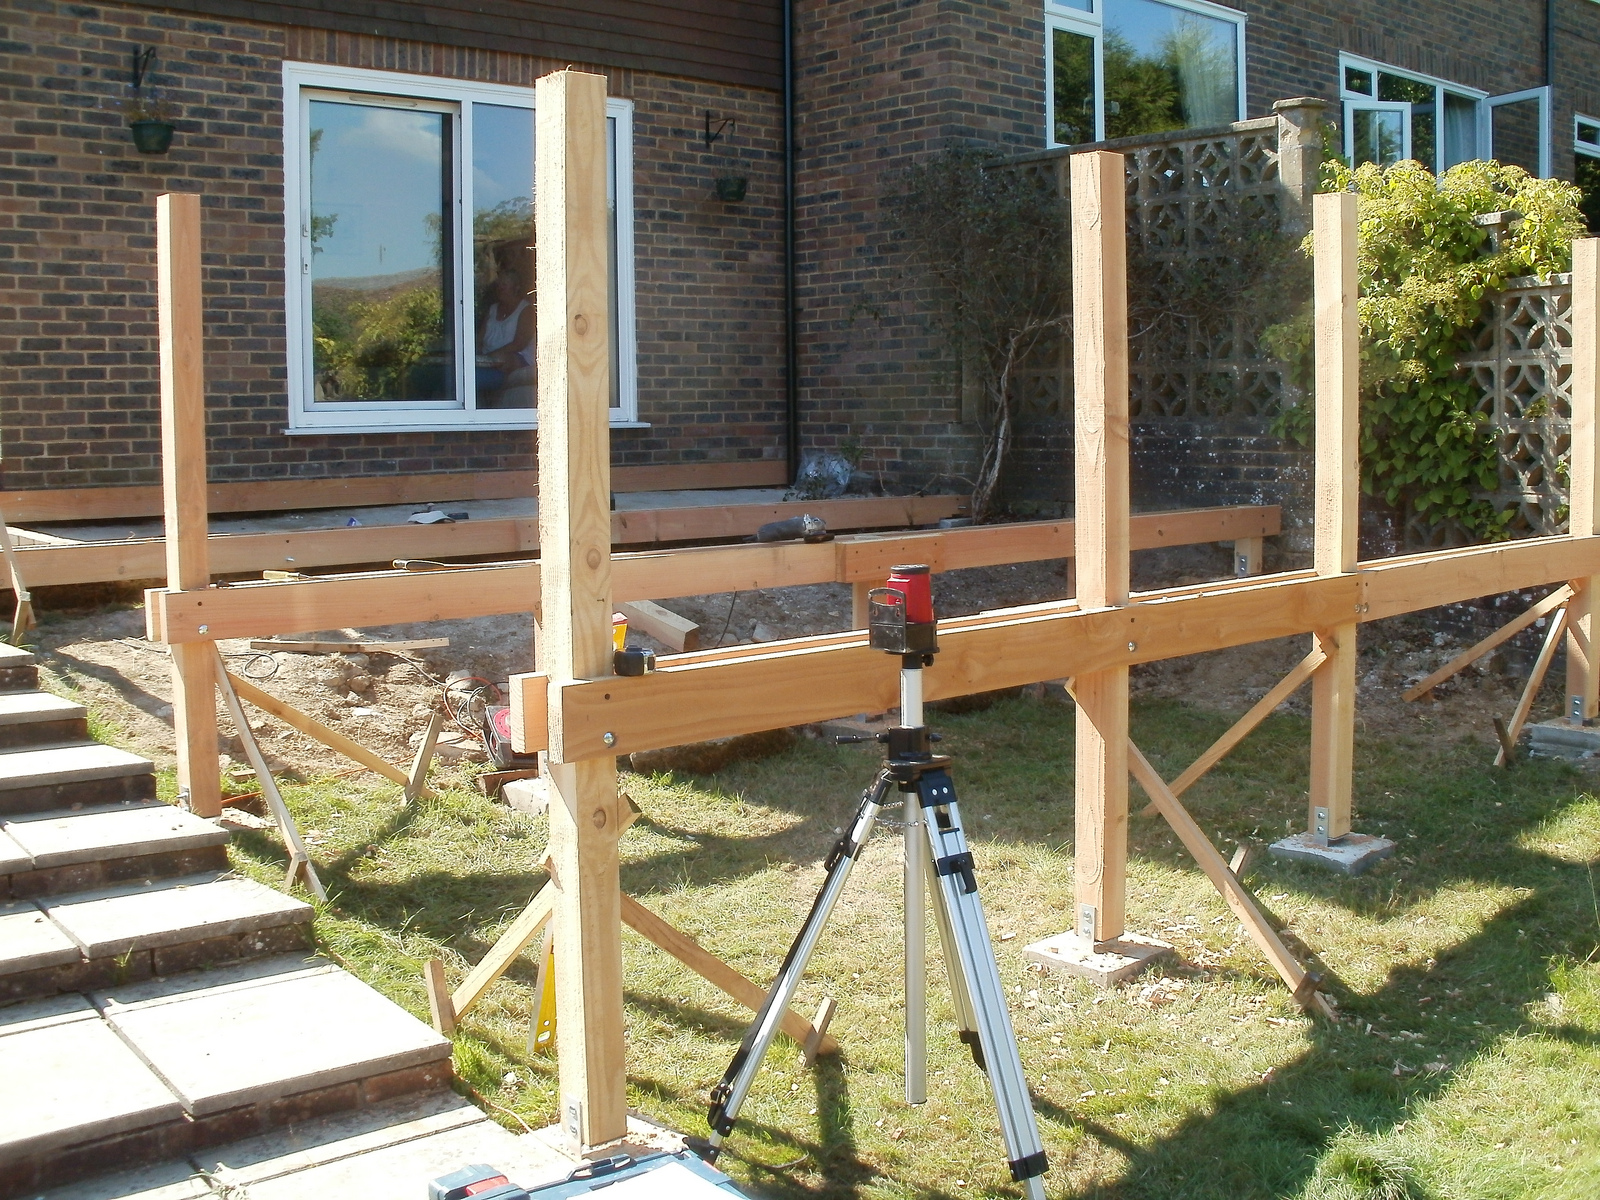 Basic layout of beams and posts, sitting on concreted metal post bases.